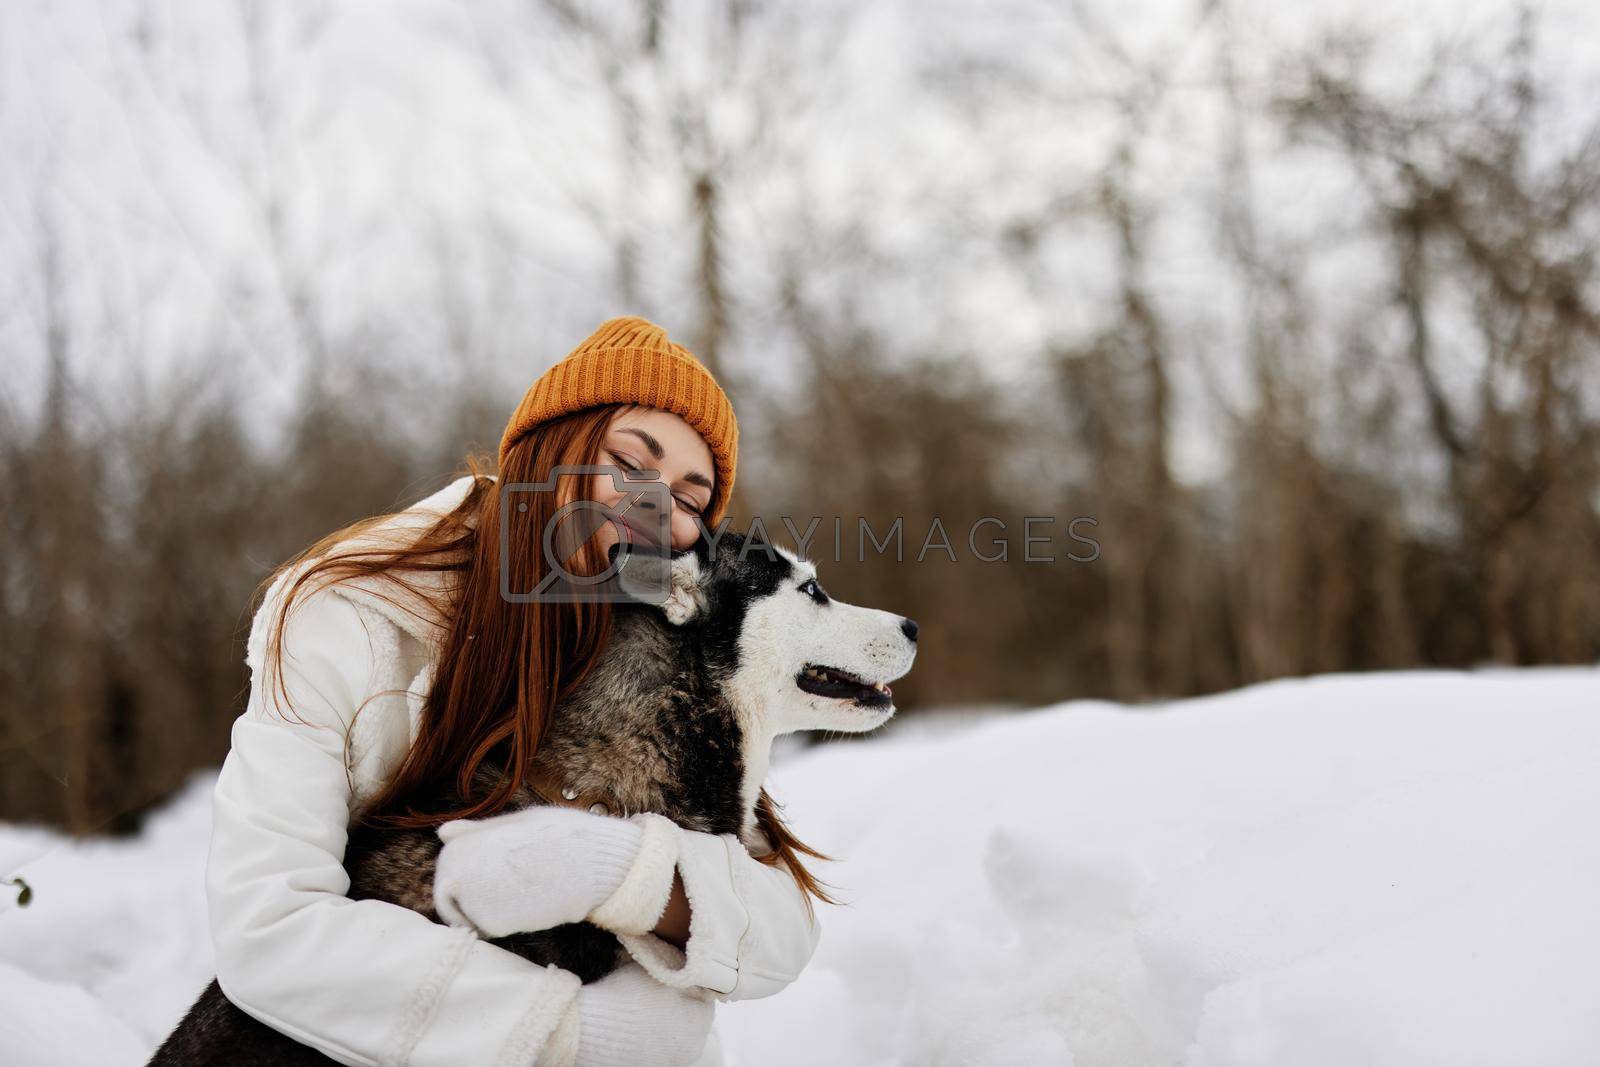 woman outdoors in a field in winter walking with a dog Lifestyle. High quality photo